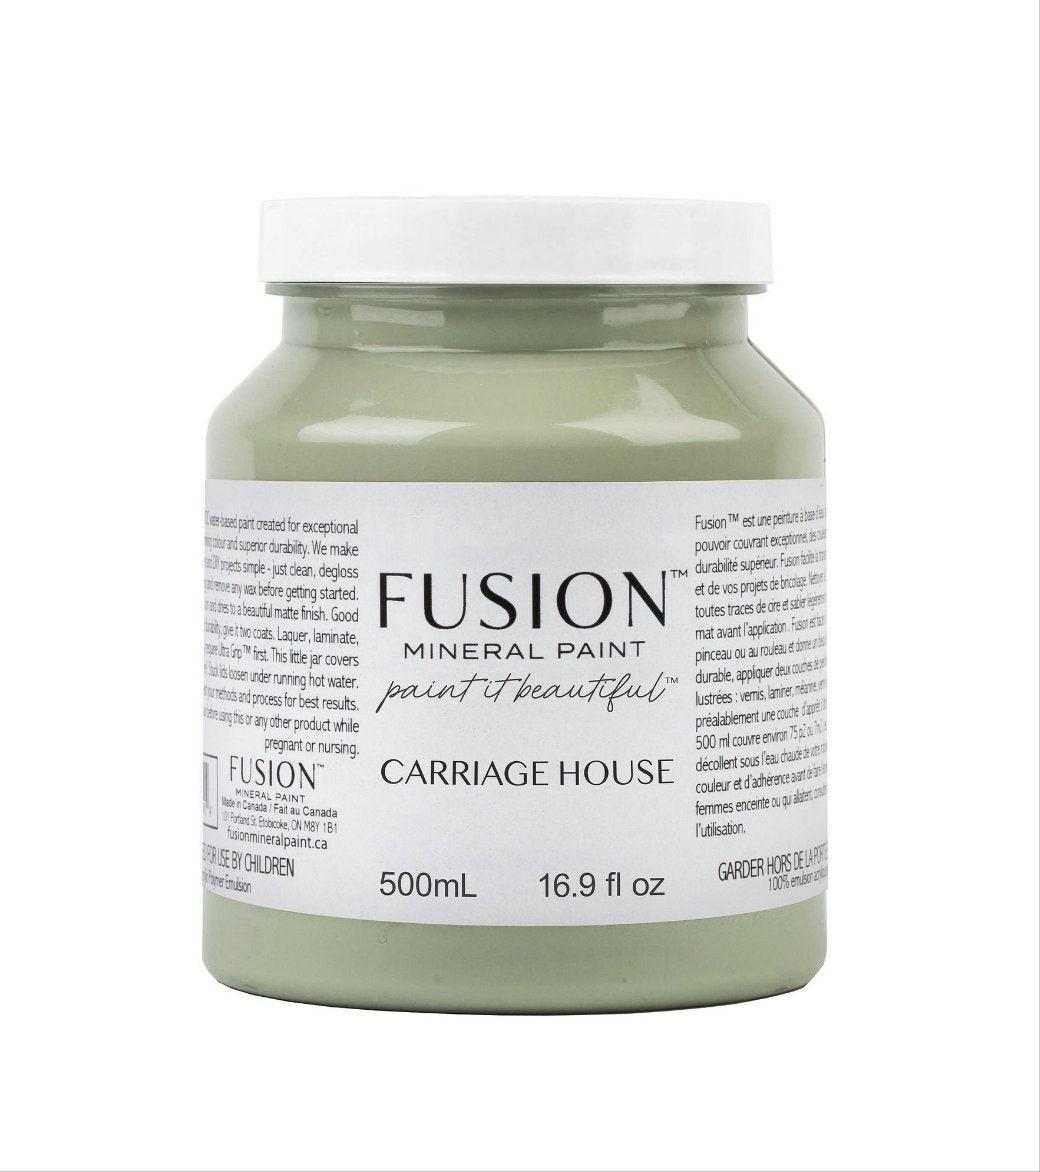 Fusion mineral paint carriage house 500ml jar